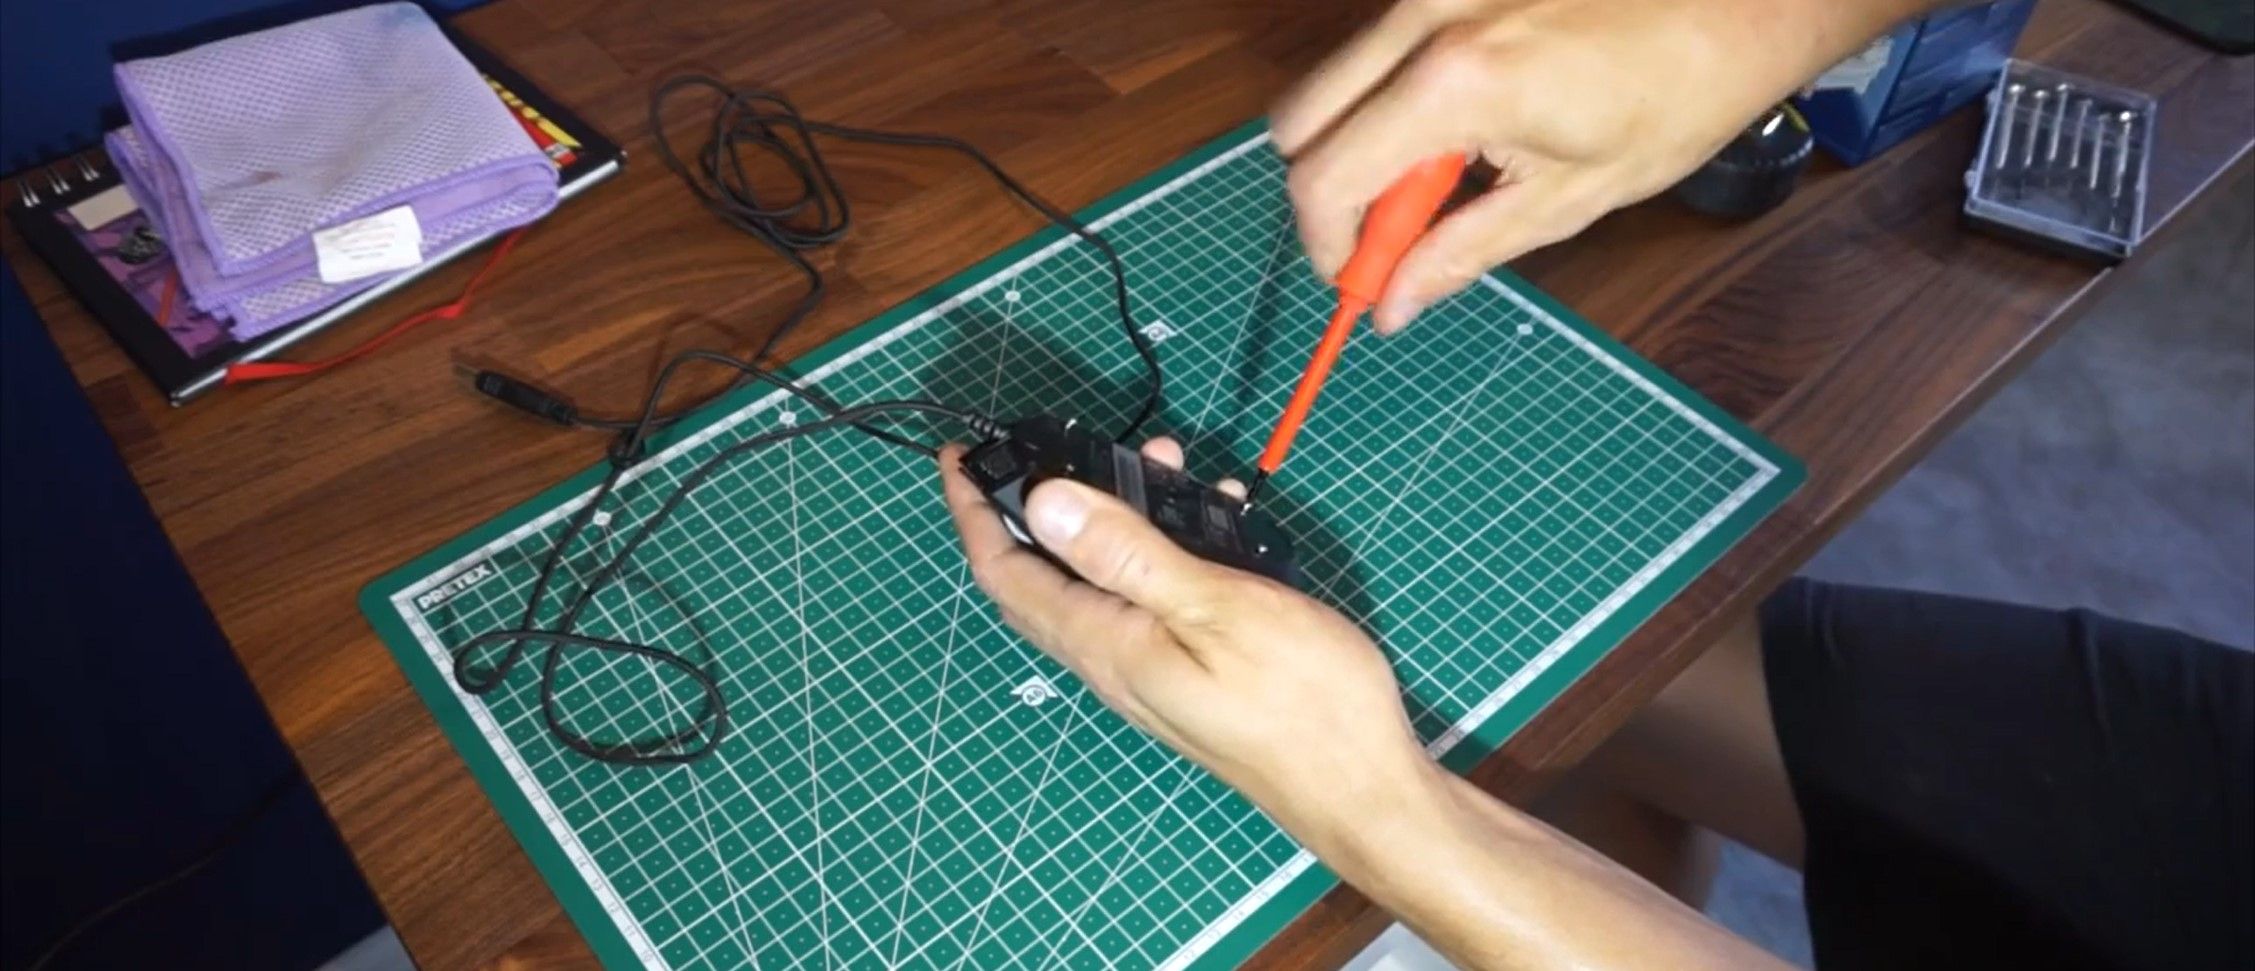 Person Unmounting the Screws to Disassemble the Mouse Casing